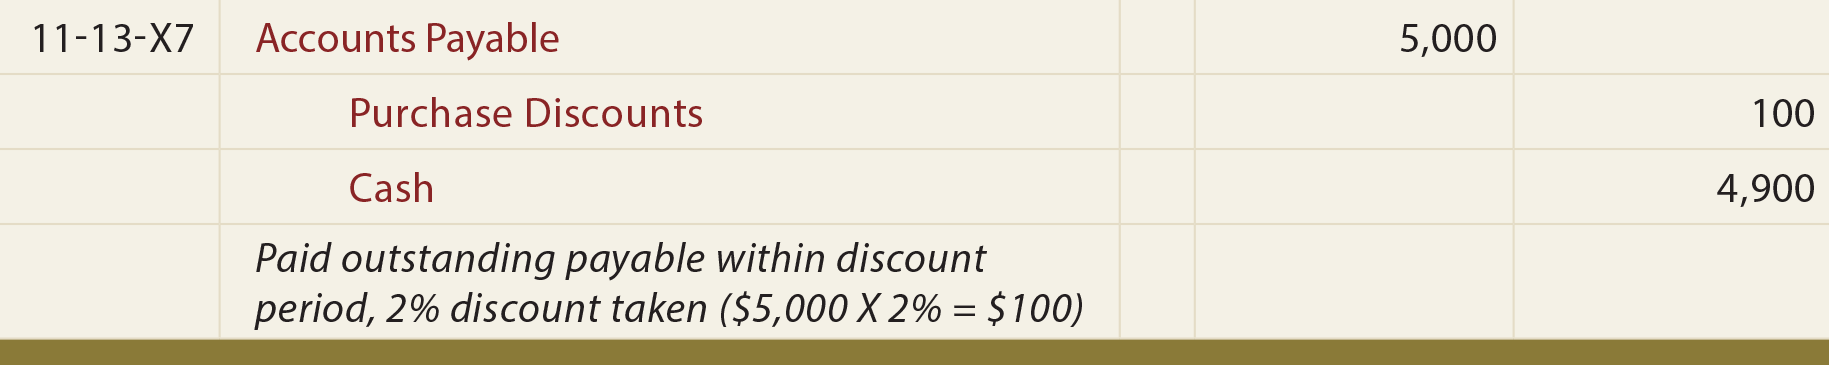 Purchases With Gross Discount General Journal Entry - Entry to record payment within the discount period